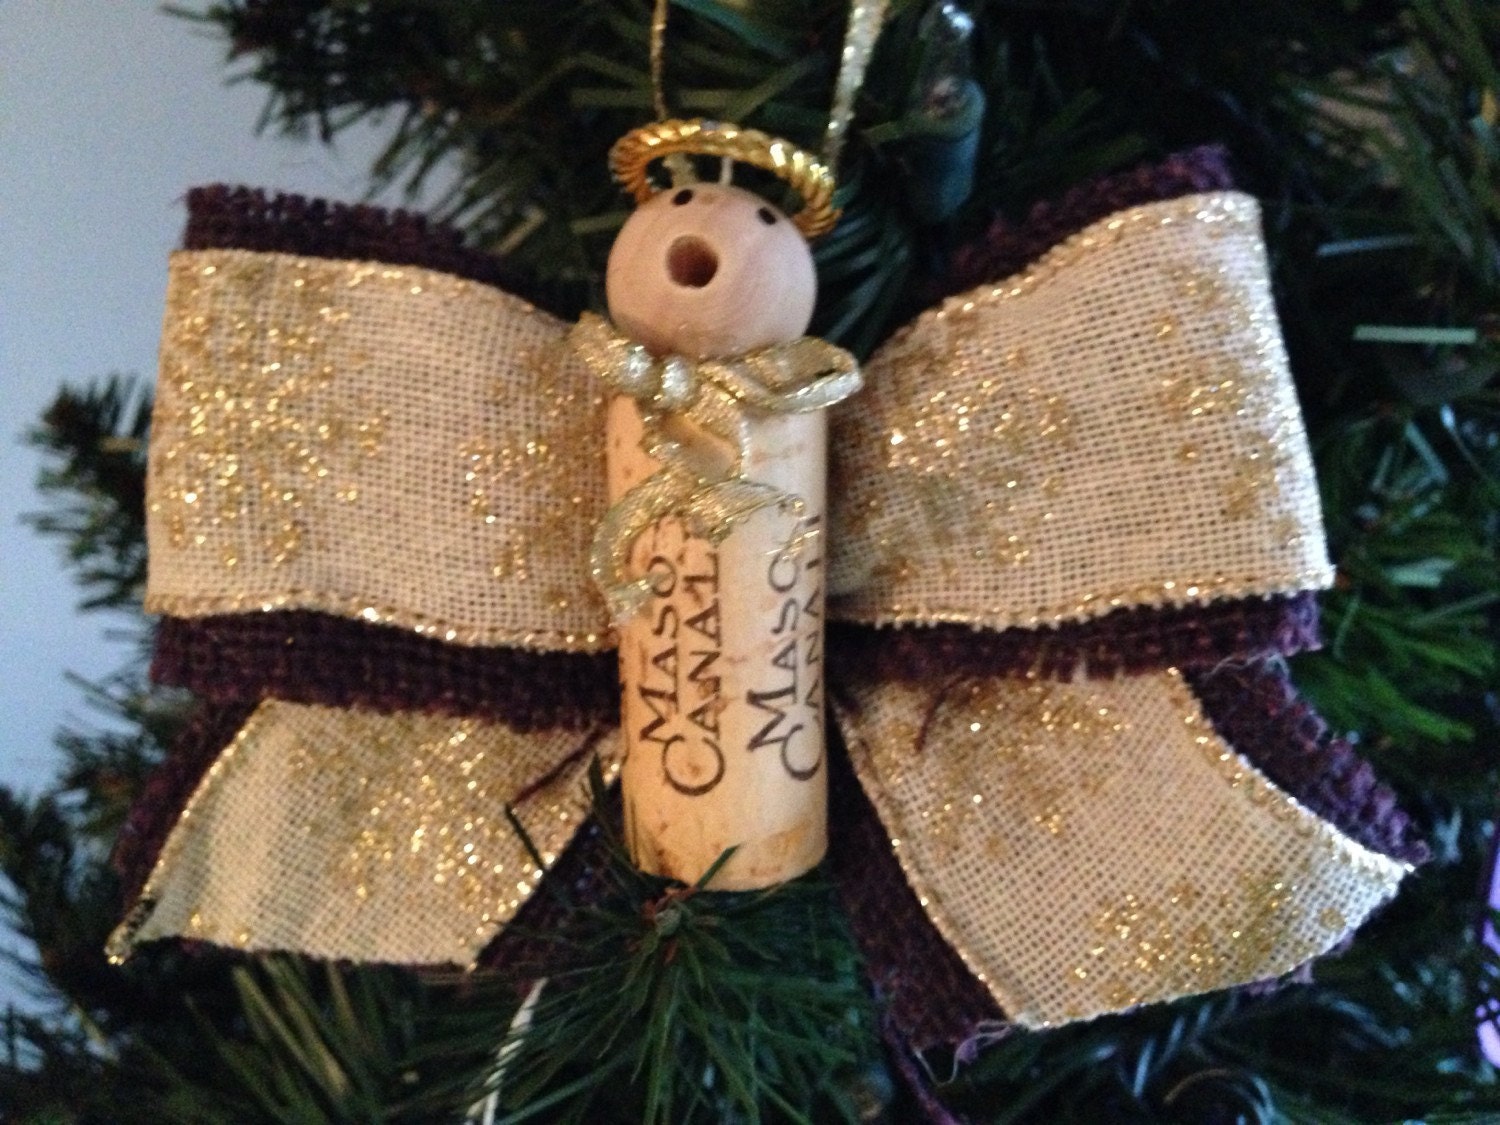 Glamorous Wine Cork Angel ornament with purple burlap and gold